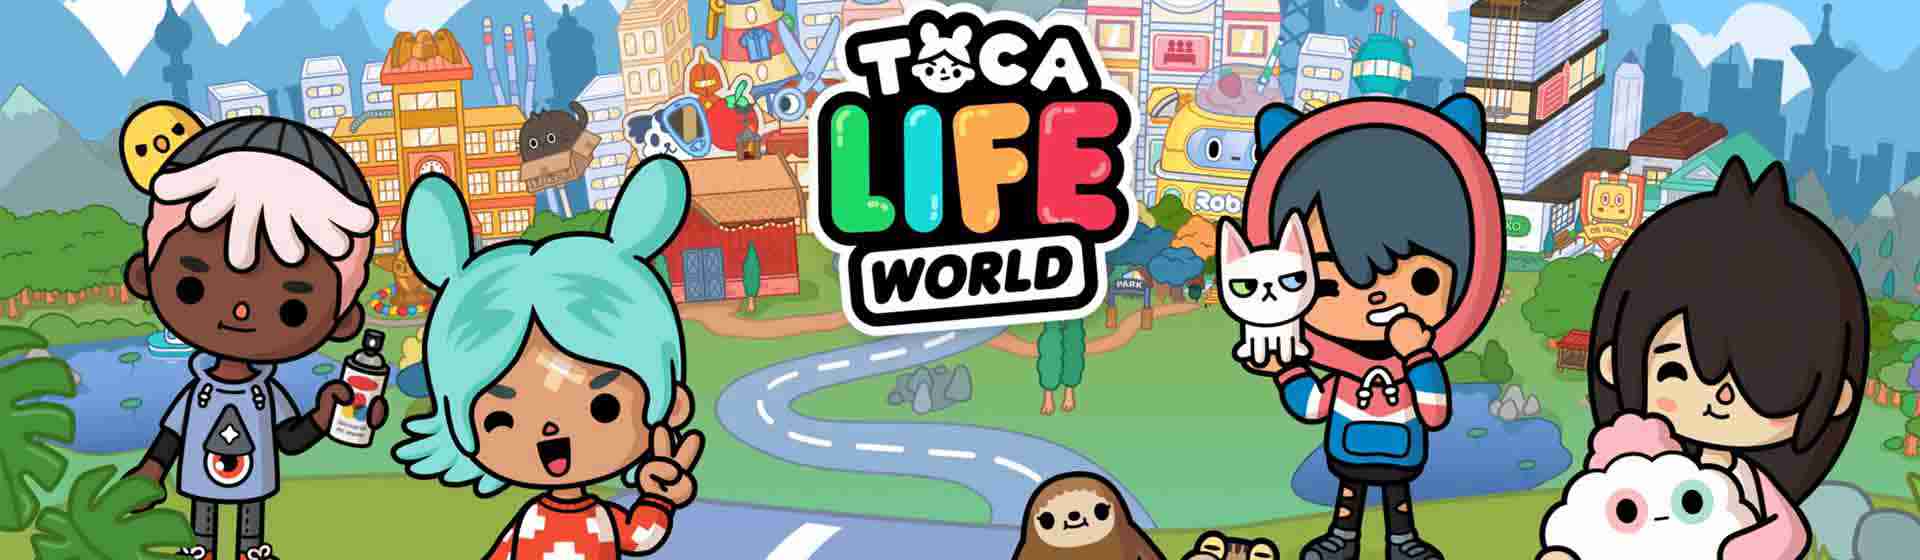 Toca Life World [Free] 🎮 Download Toca Life World Game & Play Online on